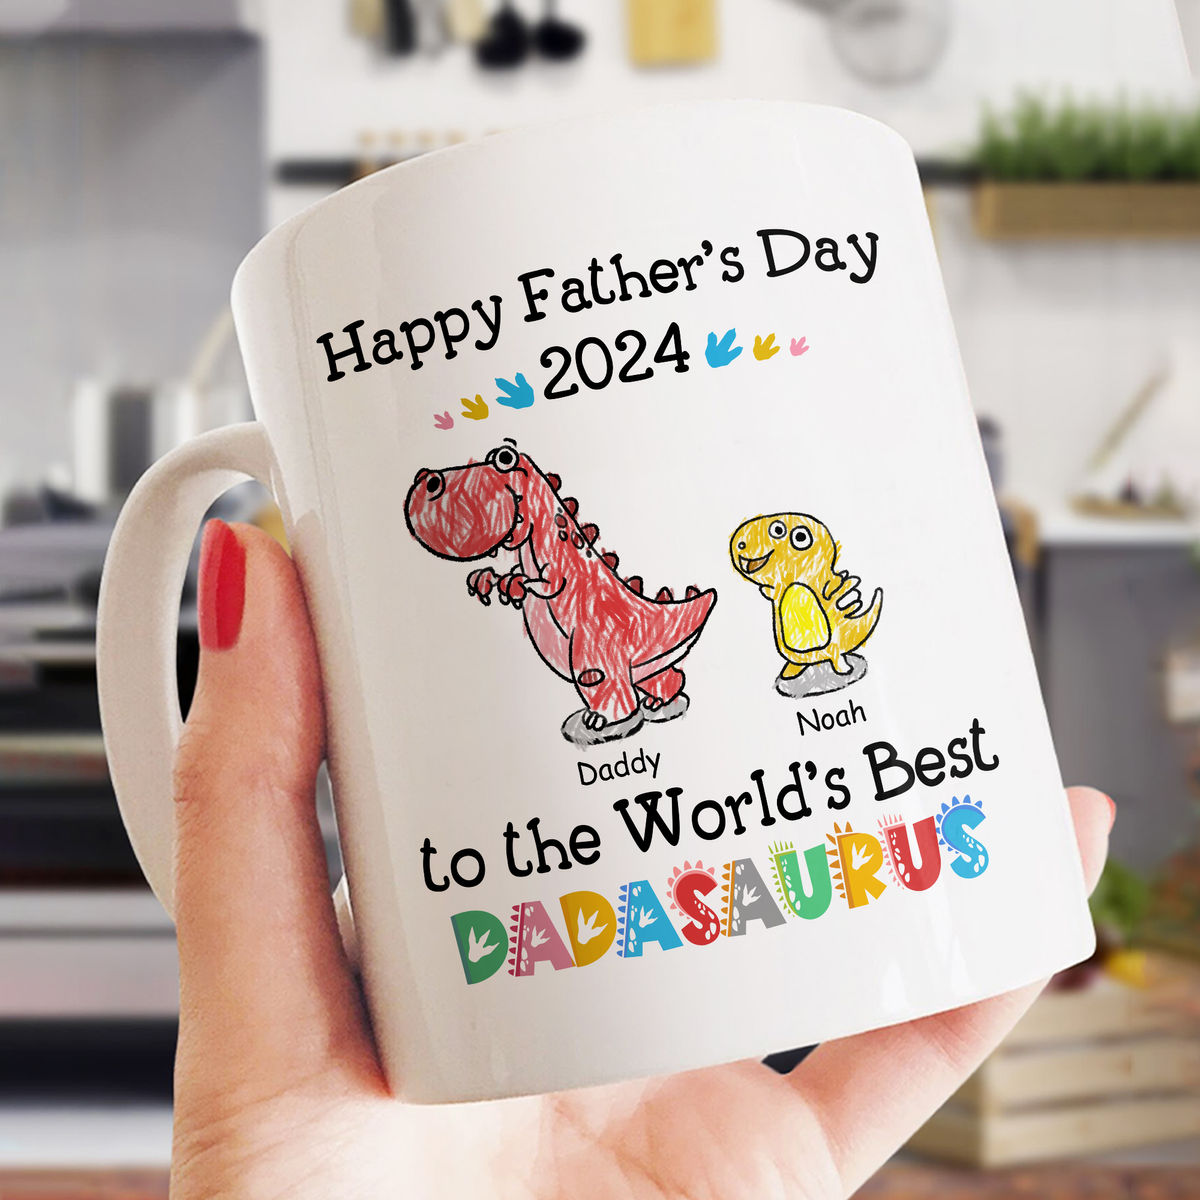 Father's Day Gift - Happy Father's Day to the world's Best Dadasaurus 2024 - Gift For Dad, Grandpa - Personalized Mug_1